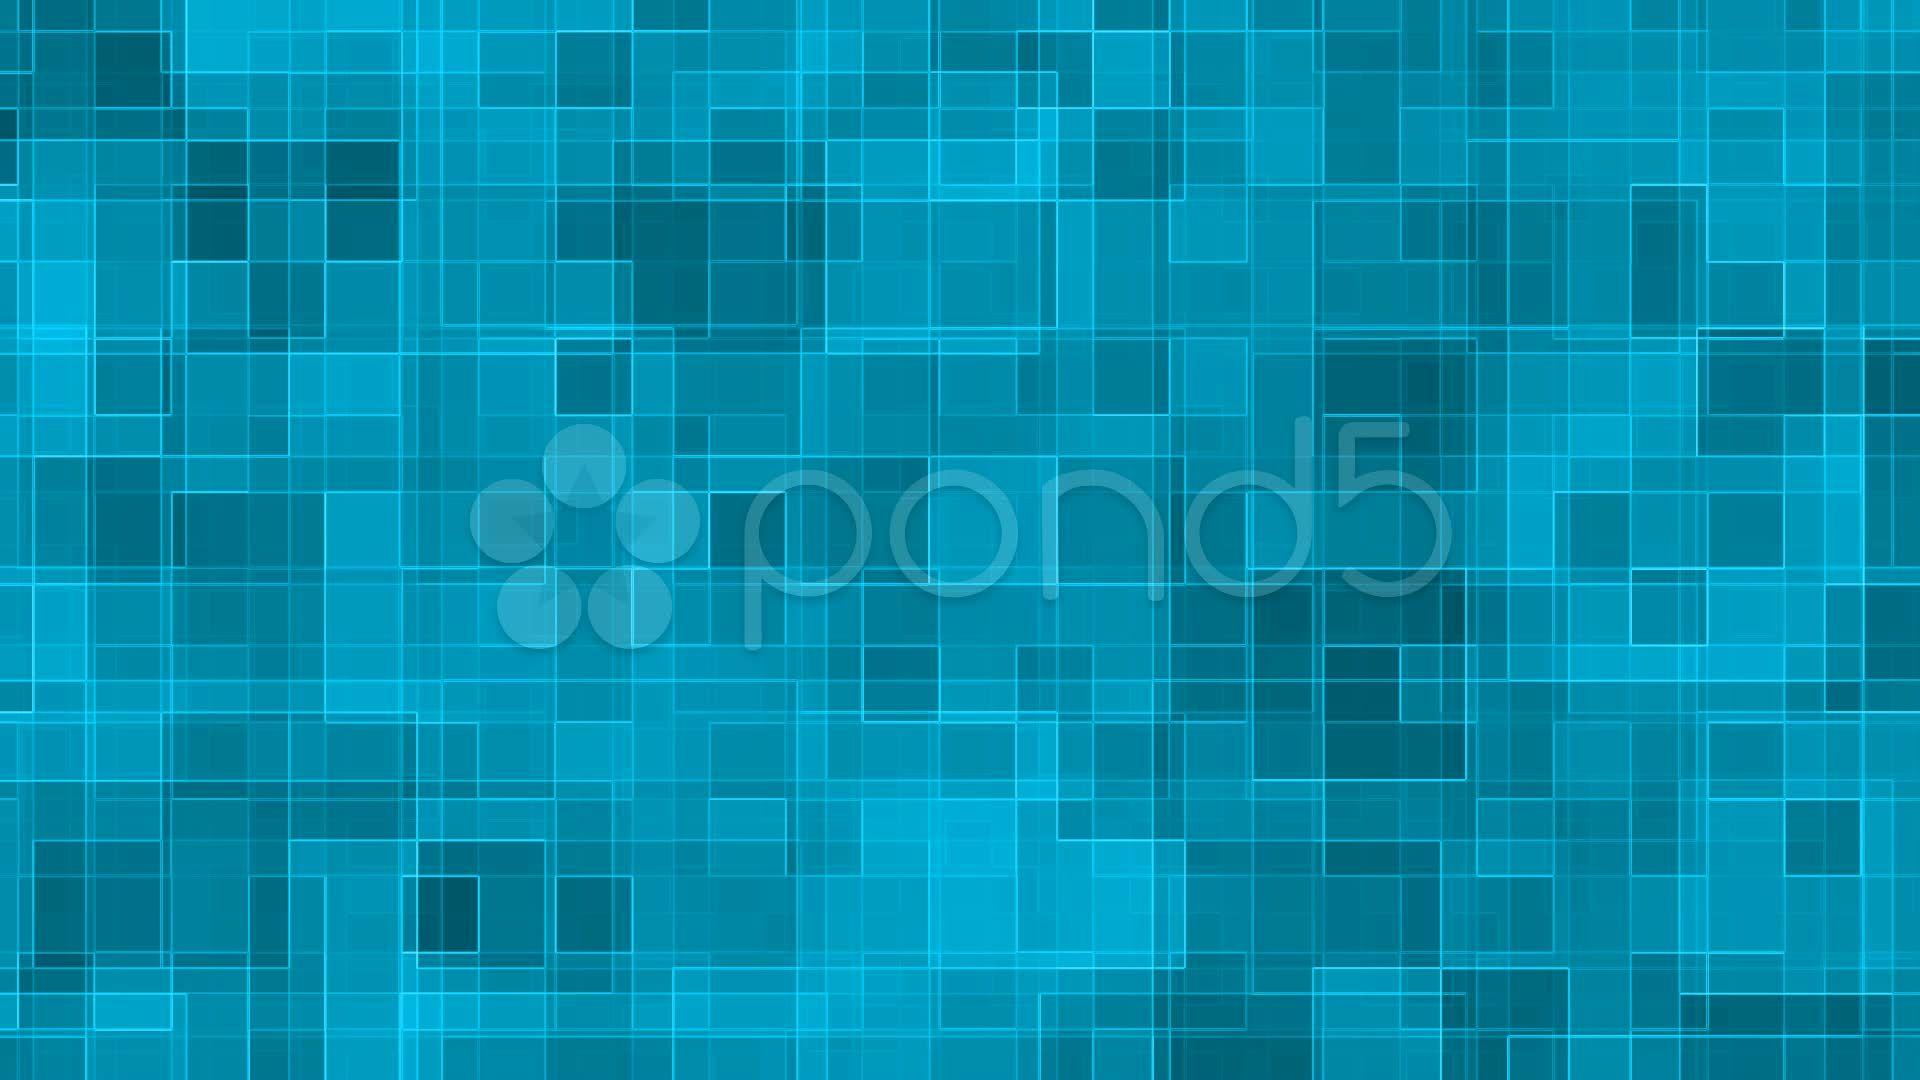 Cool Abstract Backgrounds DJ Logo - Blue Corporate Background Animation VJ DJ Stock Footage, #Background